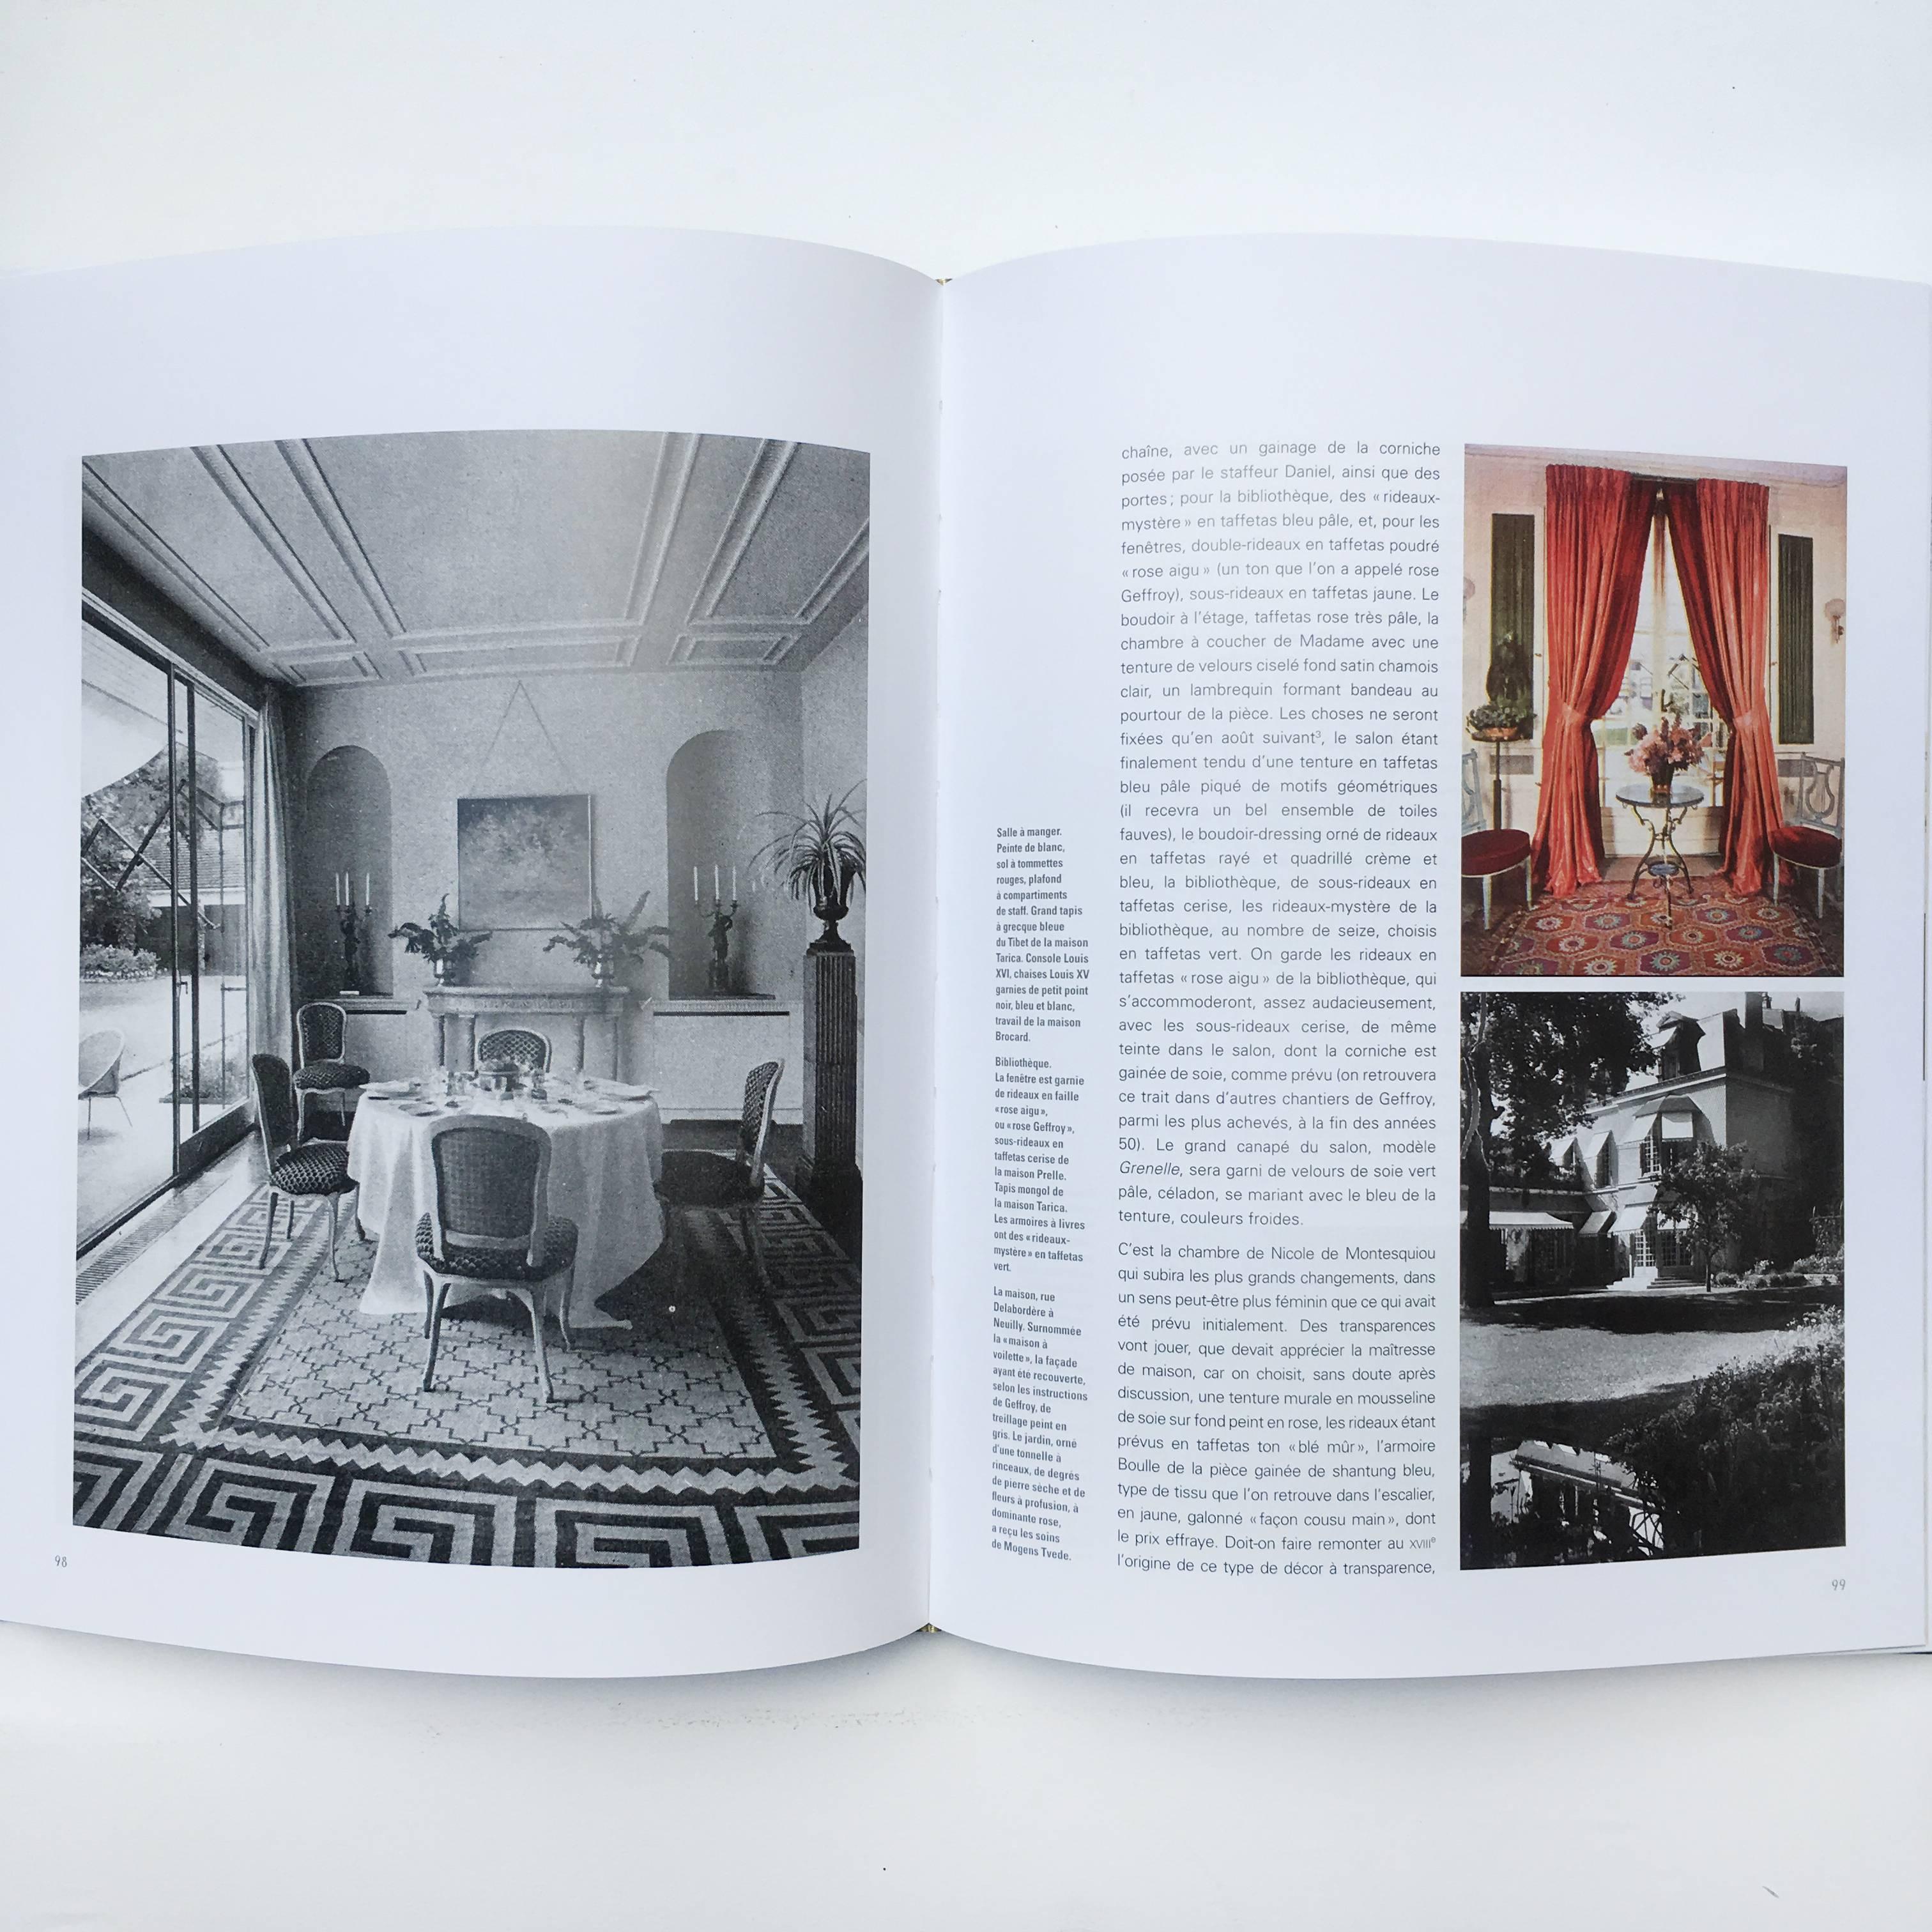 Published by Gourcuff Gradenigo
A monograph on a pivotal fifties interior designer, considered one of the most talented and inspired designers of his generation, whose work generated an unrivalled atmosphere in the grand Classical style. This book